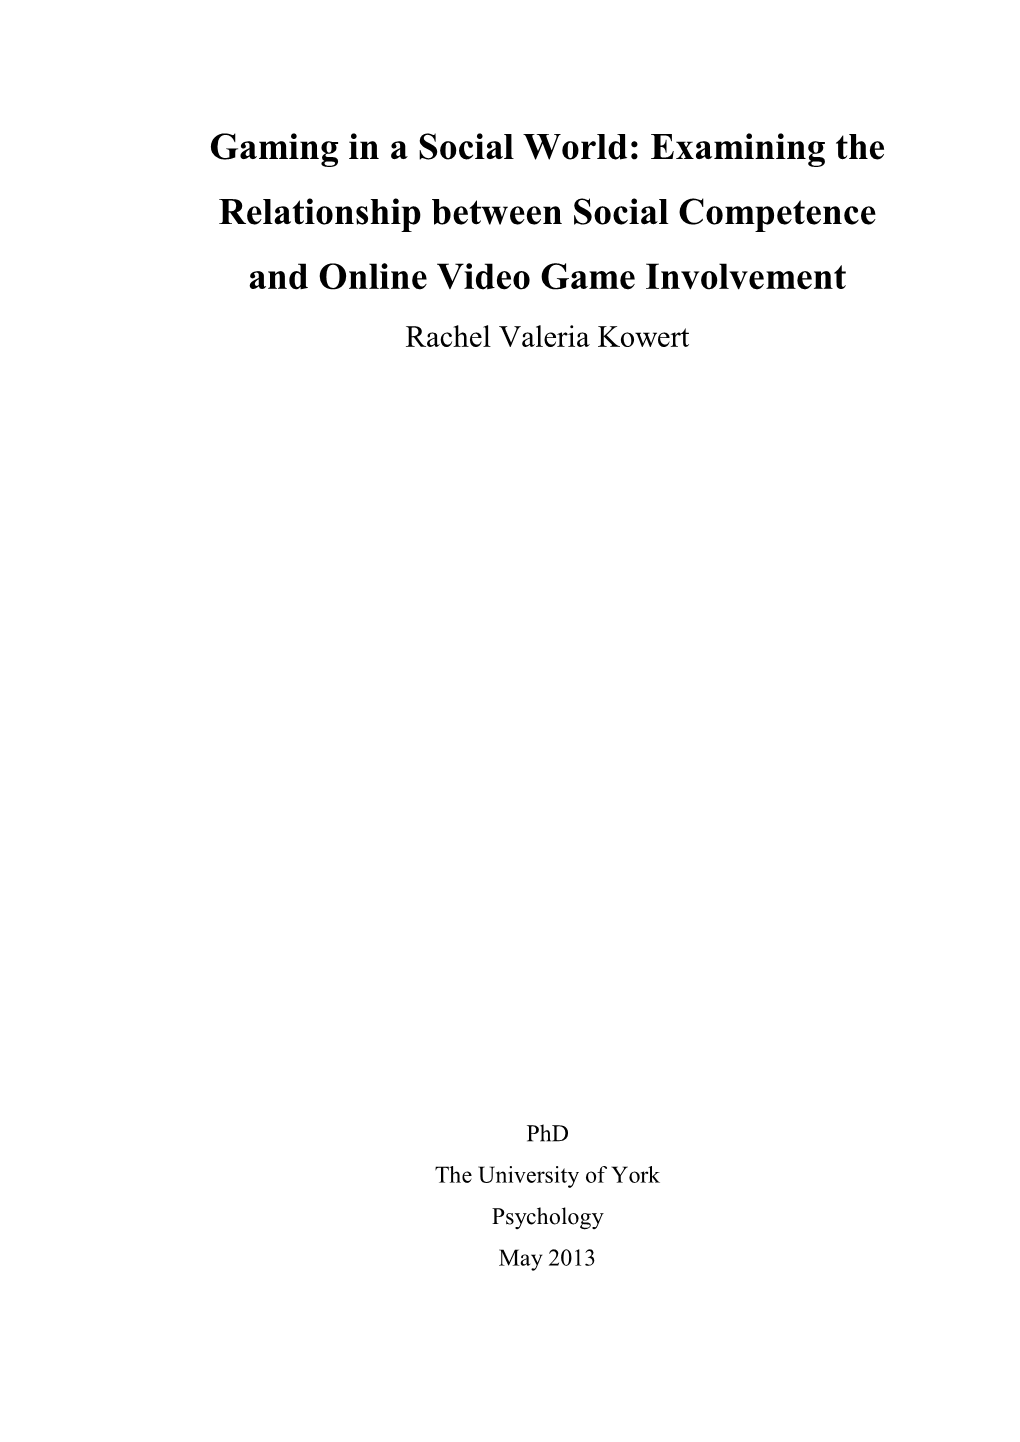 Gaming in a Social World: Examining the Relationship Between Social Competence and Online Video Game Involvement Rachel Valeria Kowert